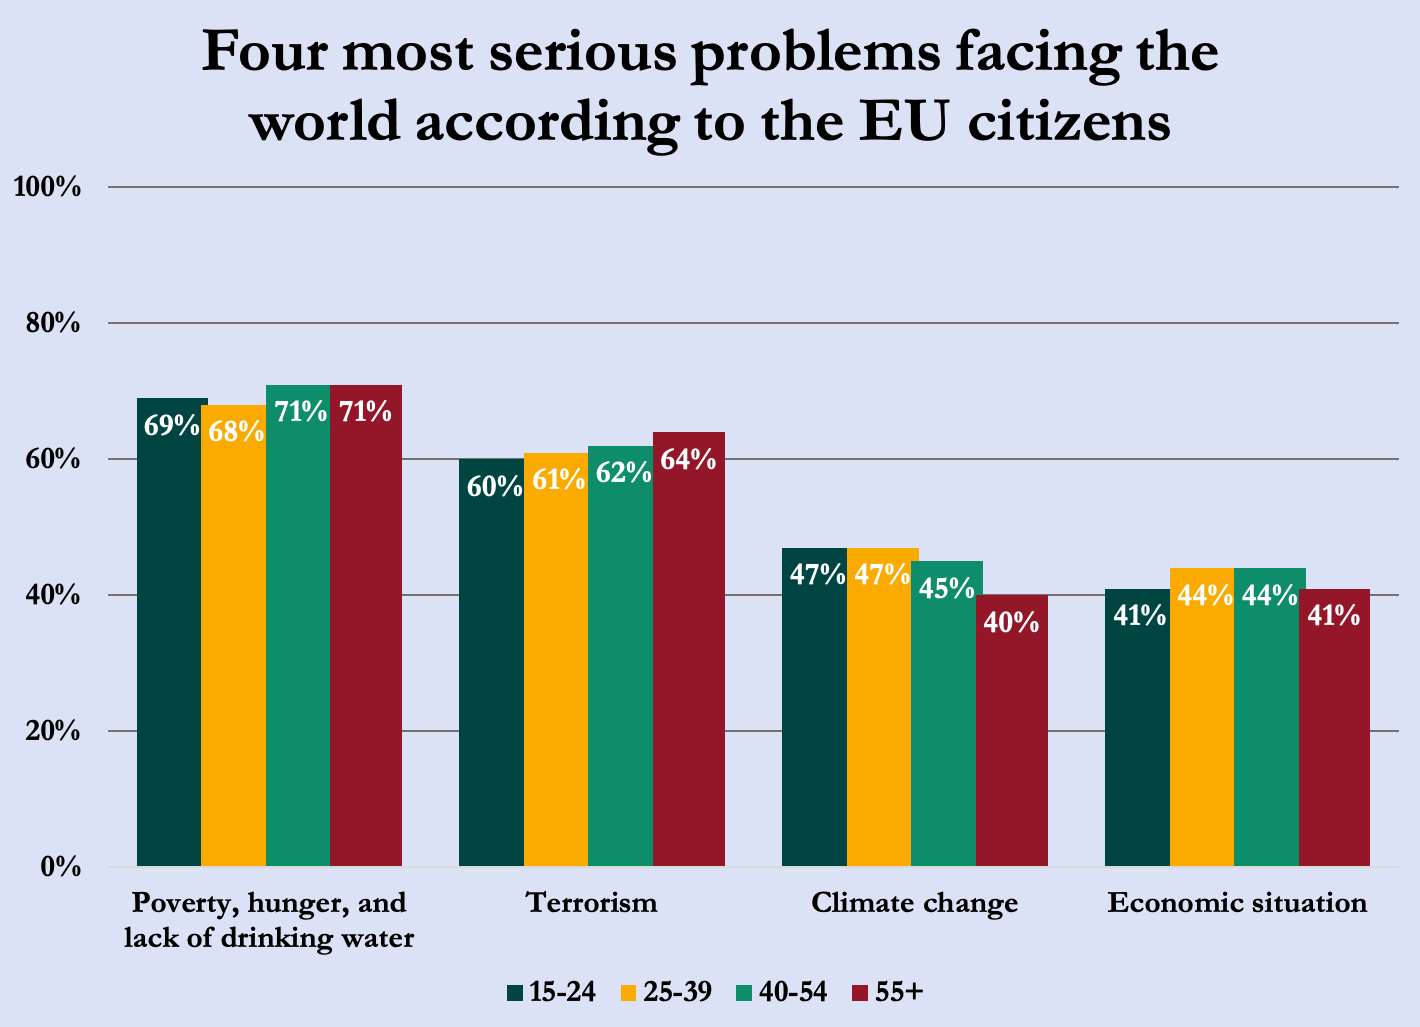 Most serious problems facing the world according to the EU citizens